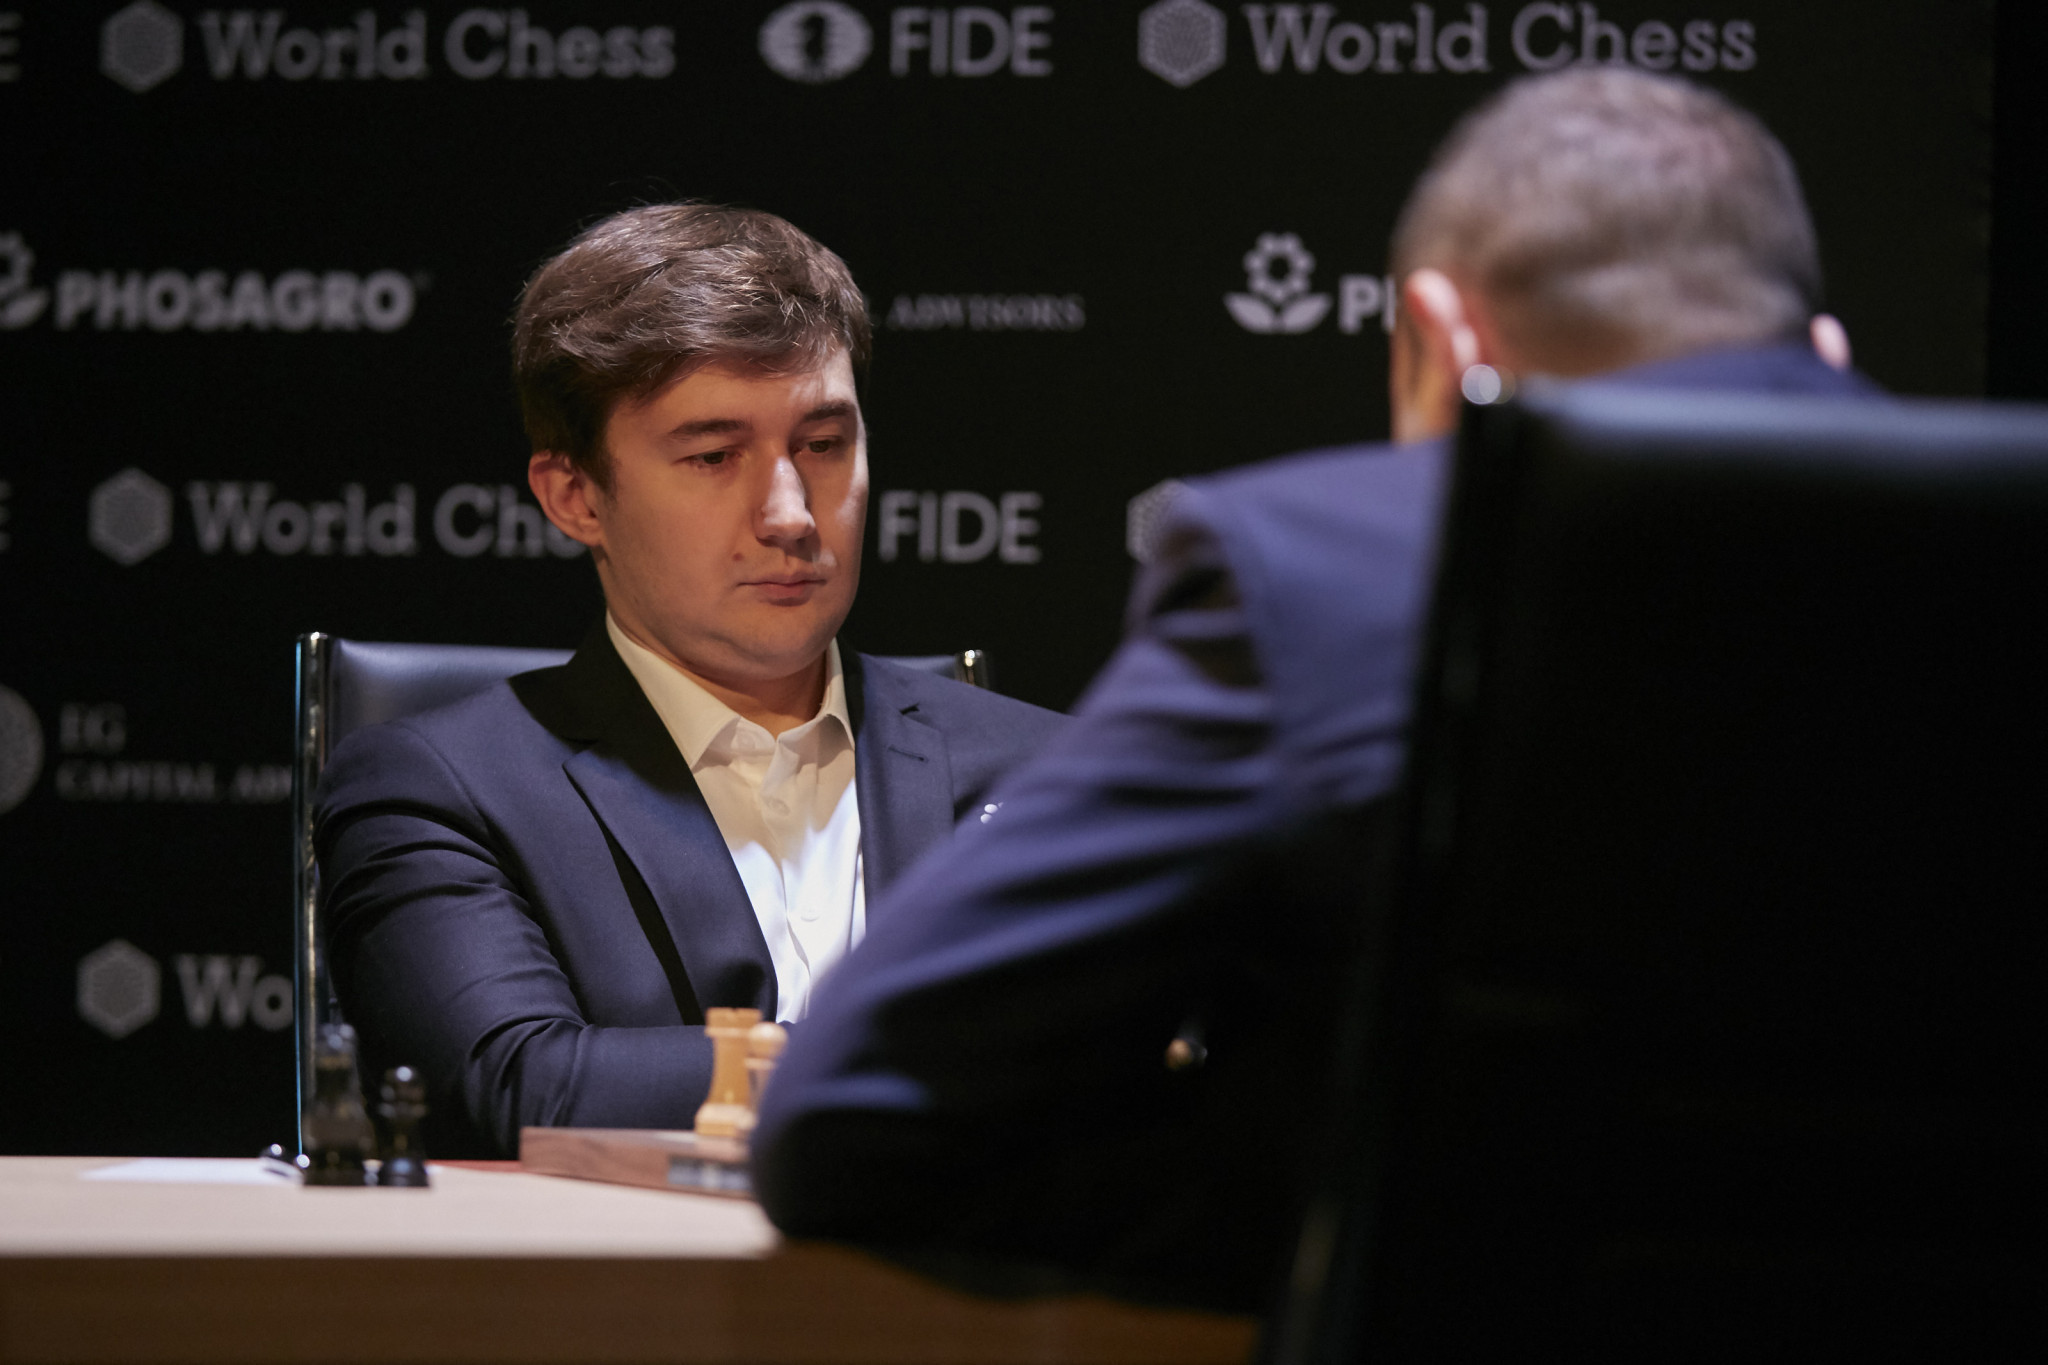 The Russian Chess Federation's decision was backed by Sergey Karjakin, who has been banned by FIDE for six months after declaring his support for Russia's war in Ukraine ©Getty Images